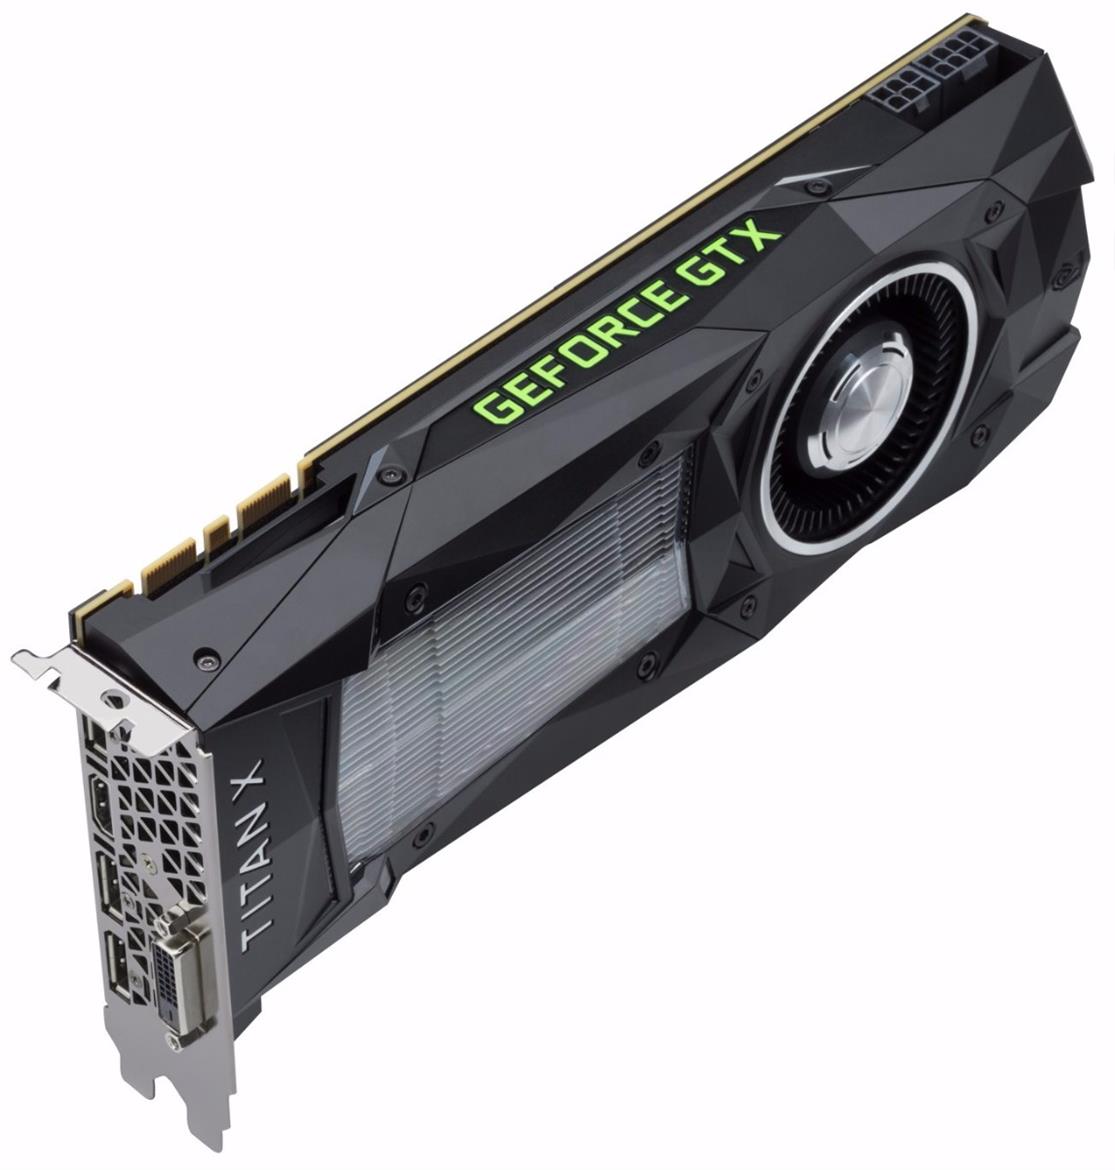 NVIDIA TITAN X Review: The Pascal Beast Unleashed